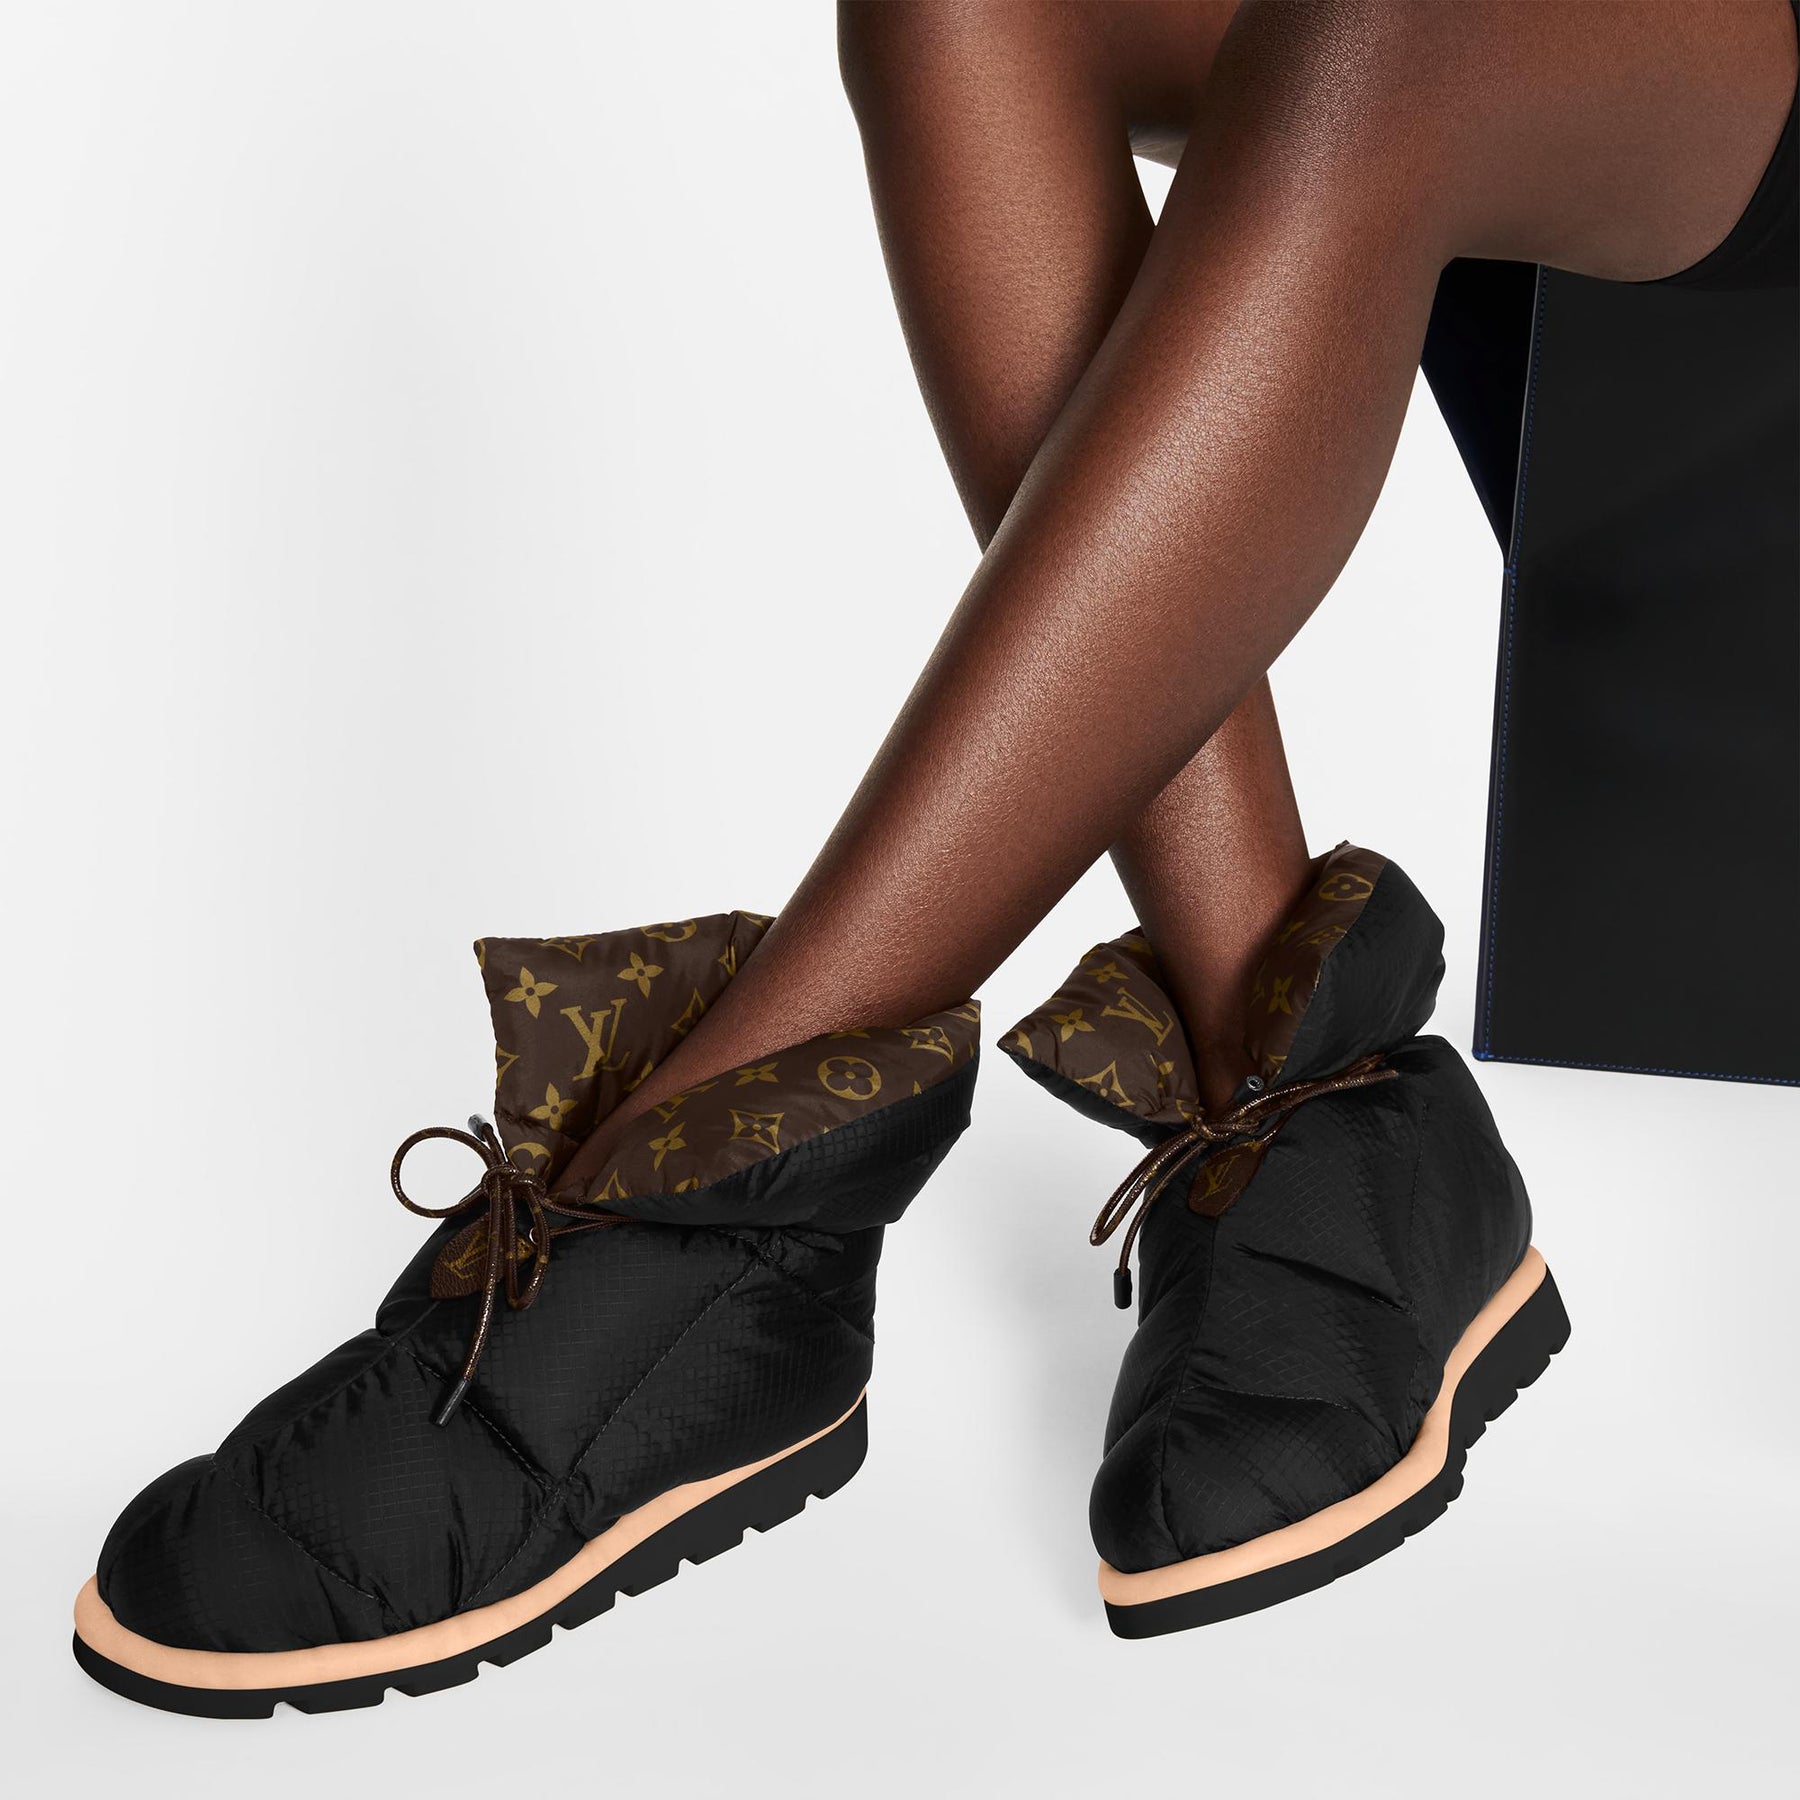 Louis Vuitton's Pillow Boots Are a Cozy Antidote to the Pandemic